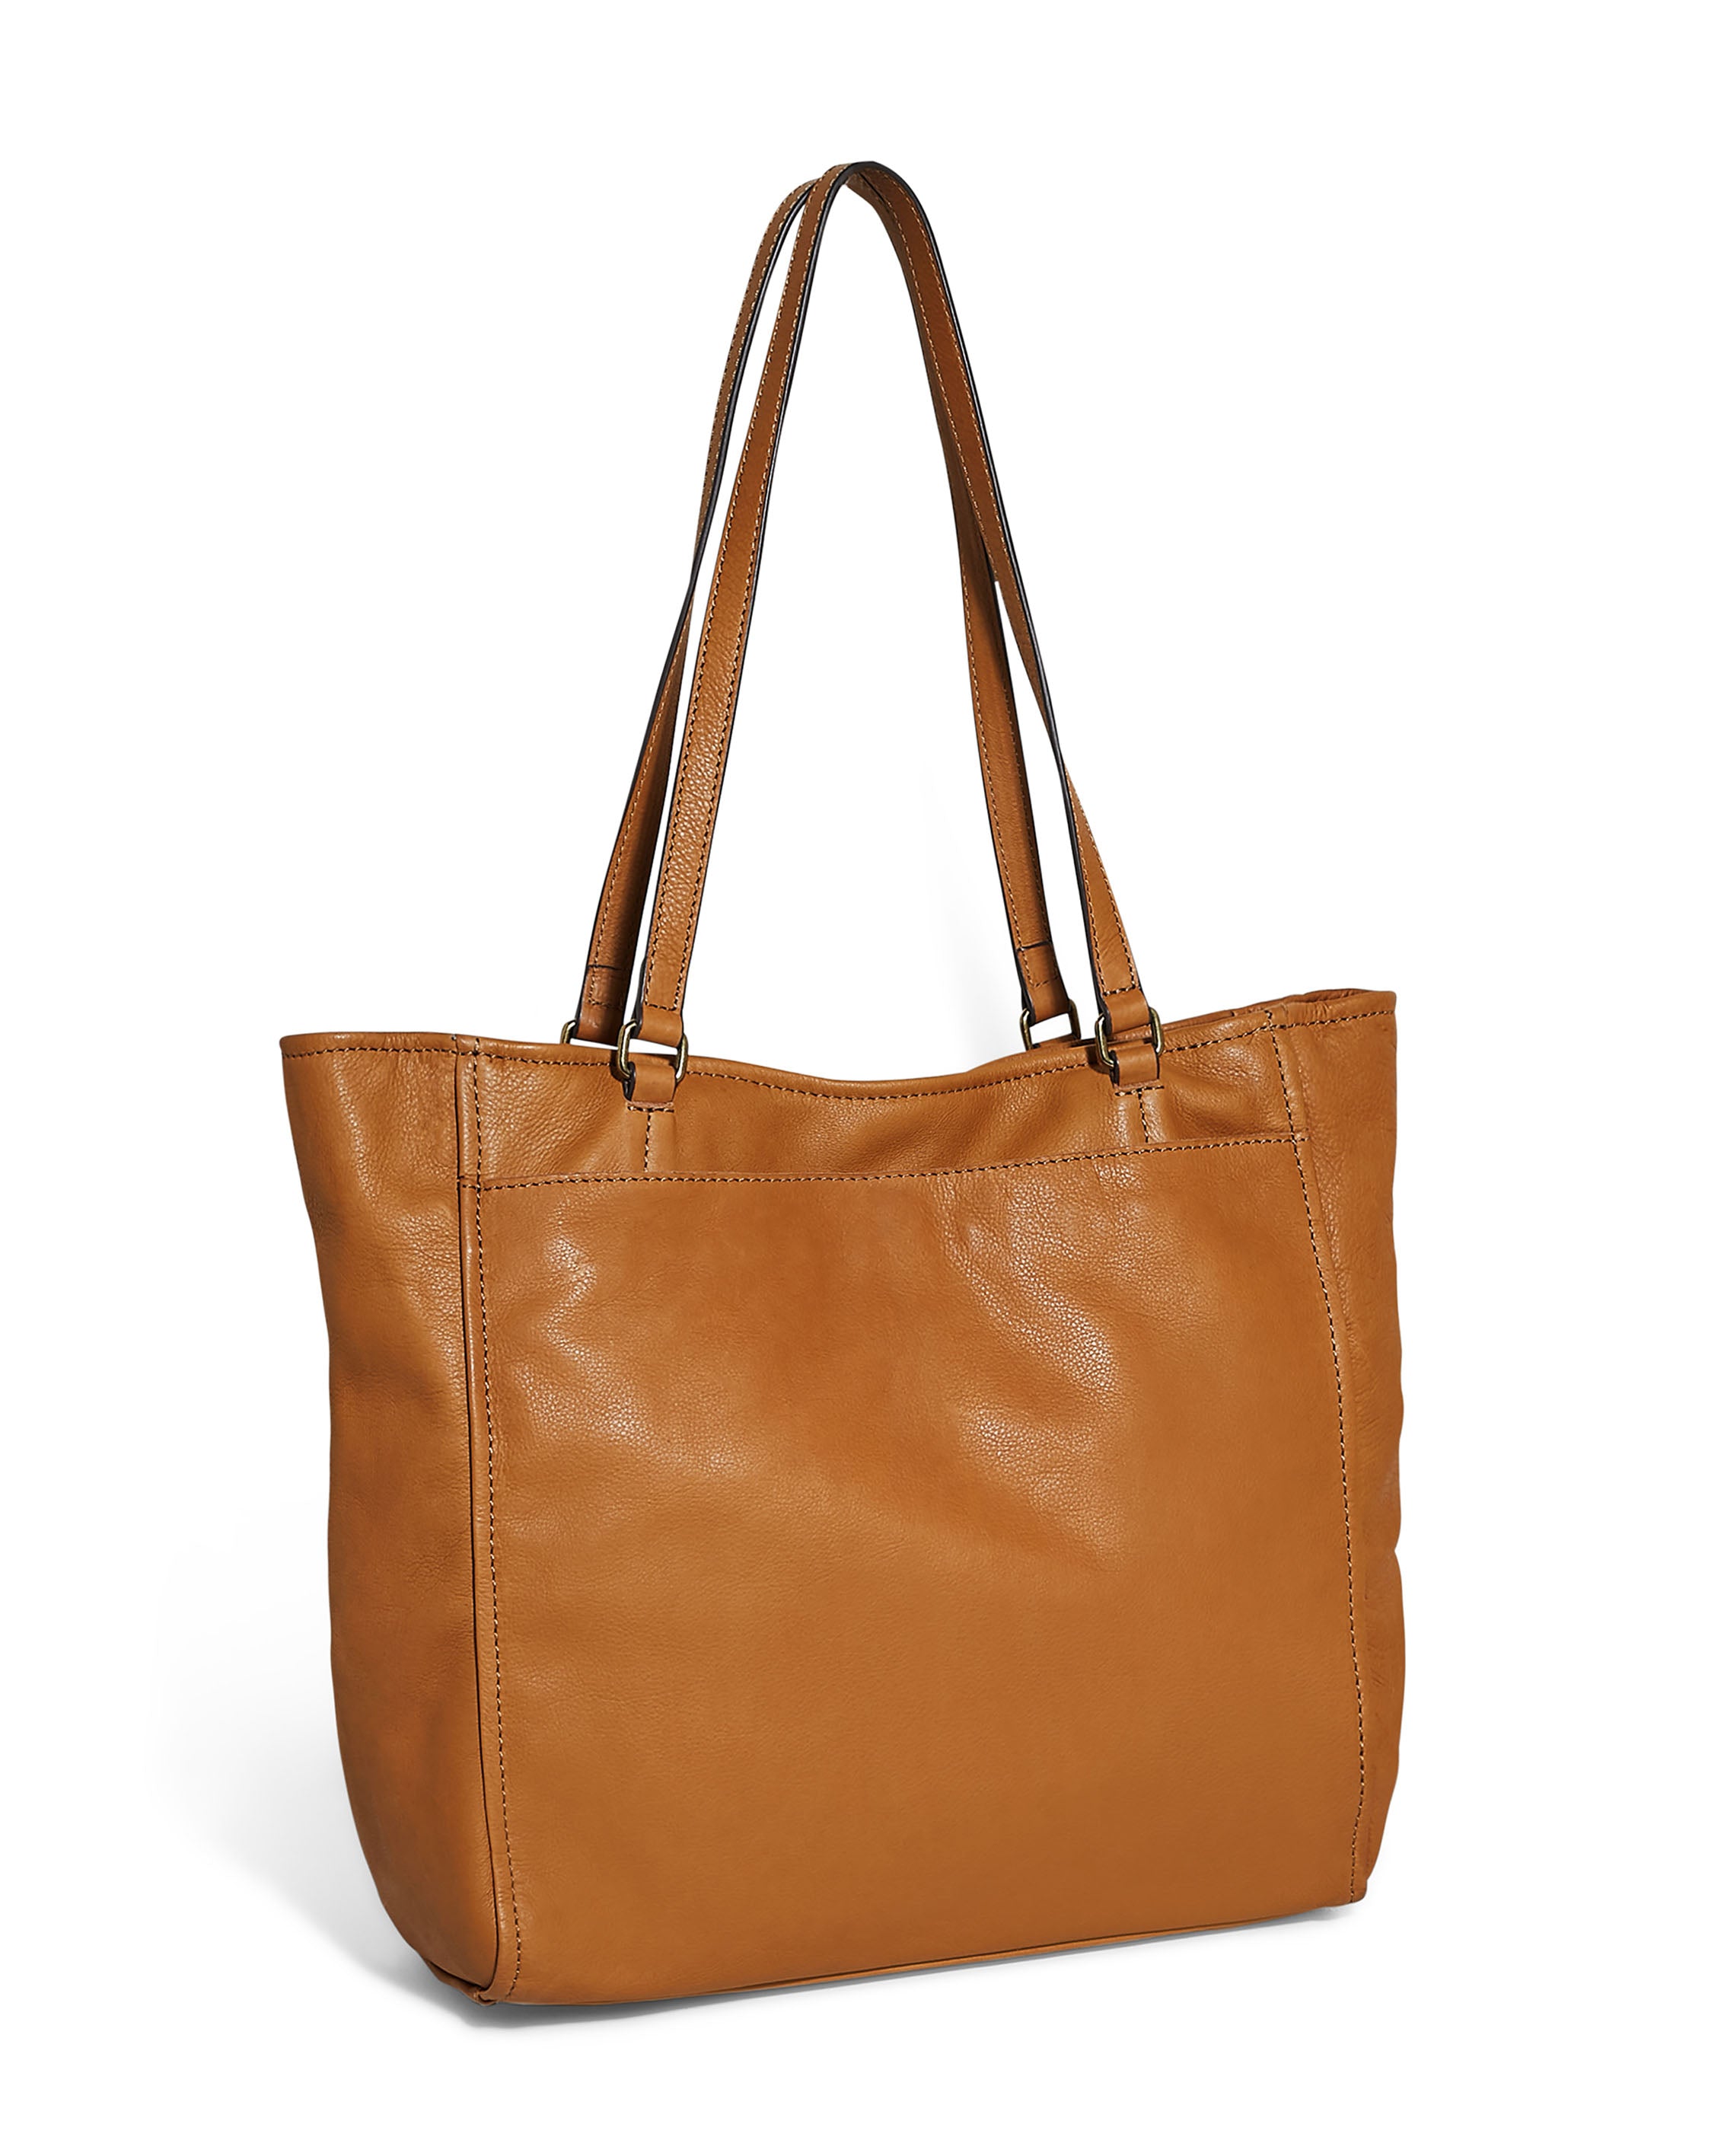 Carter Tote in Café Latte | American Leather Co.